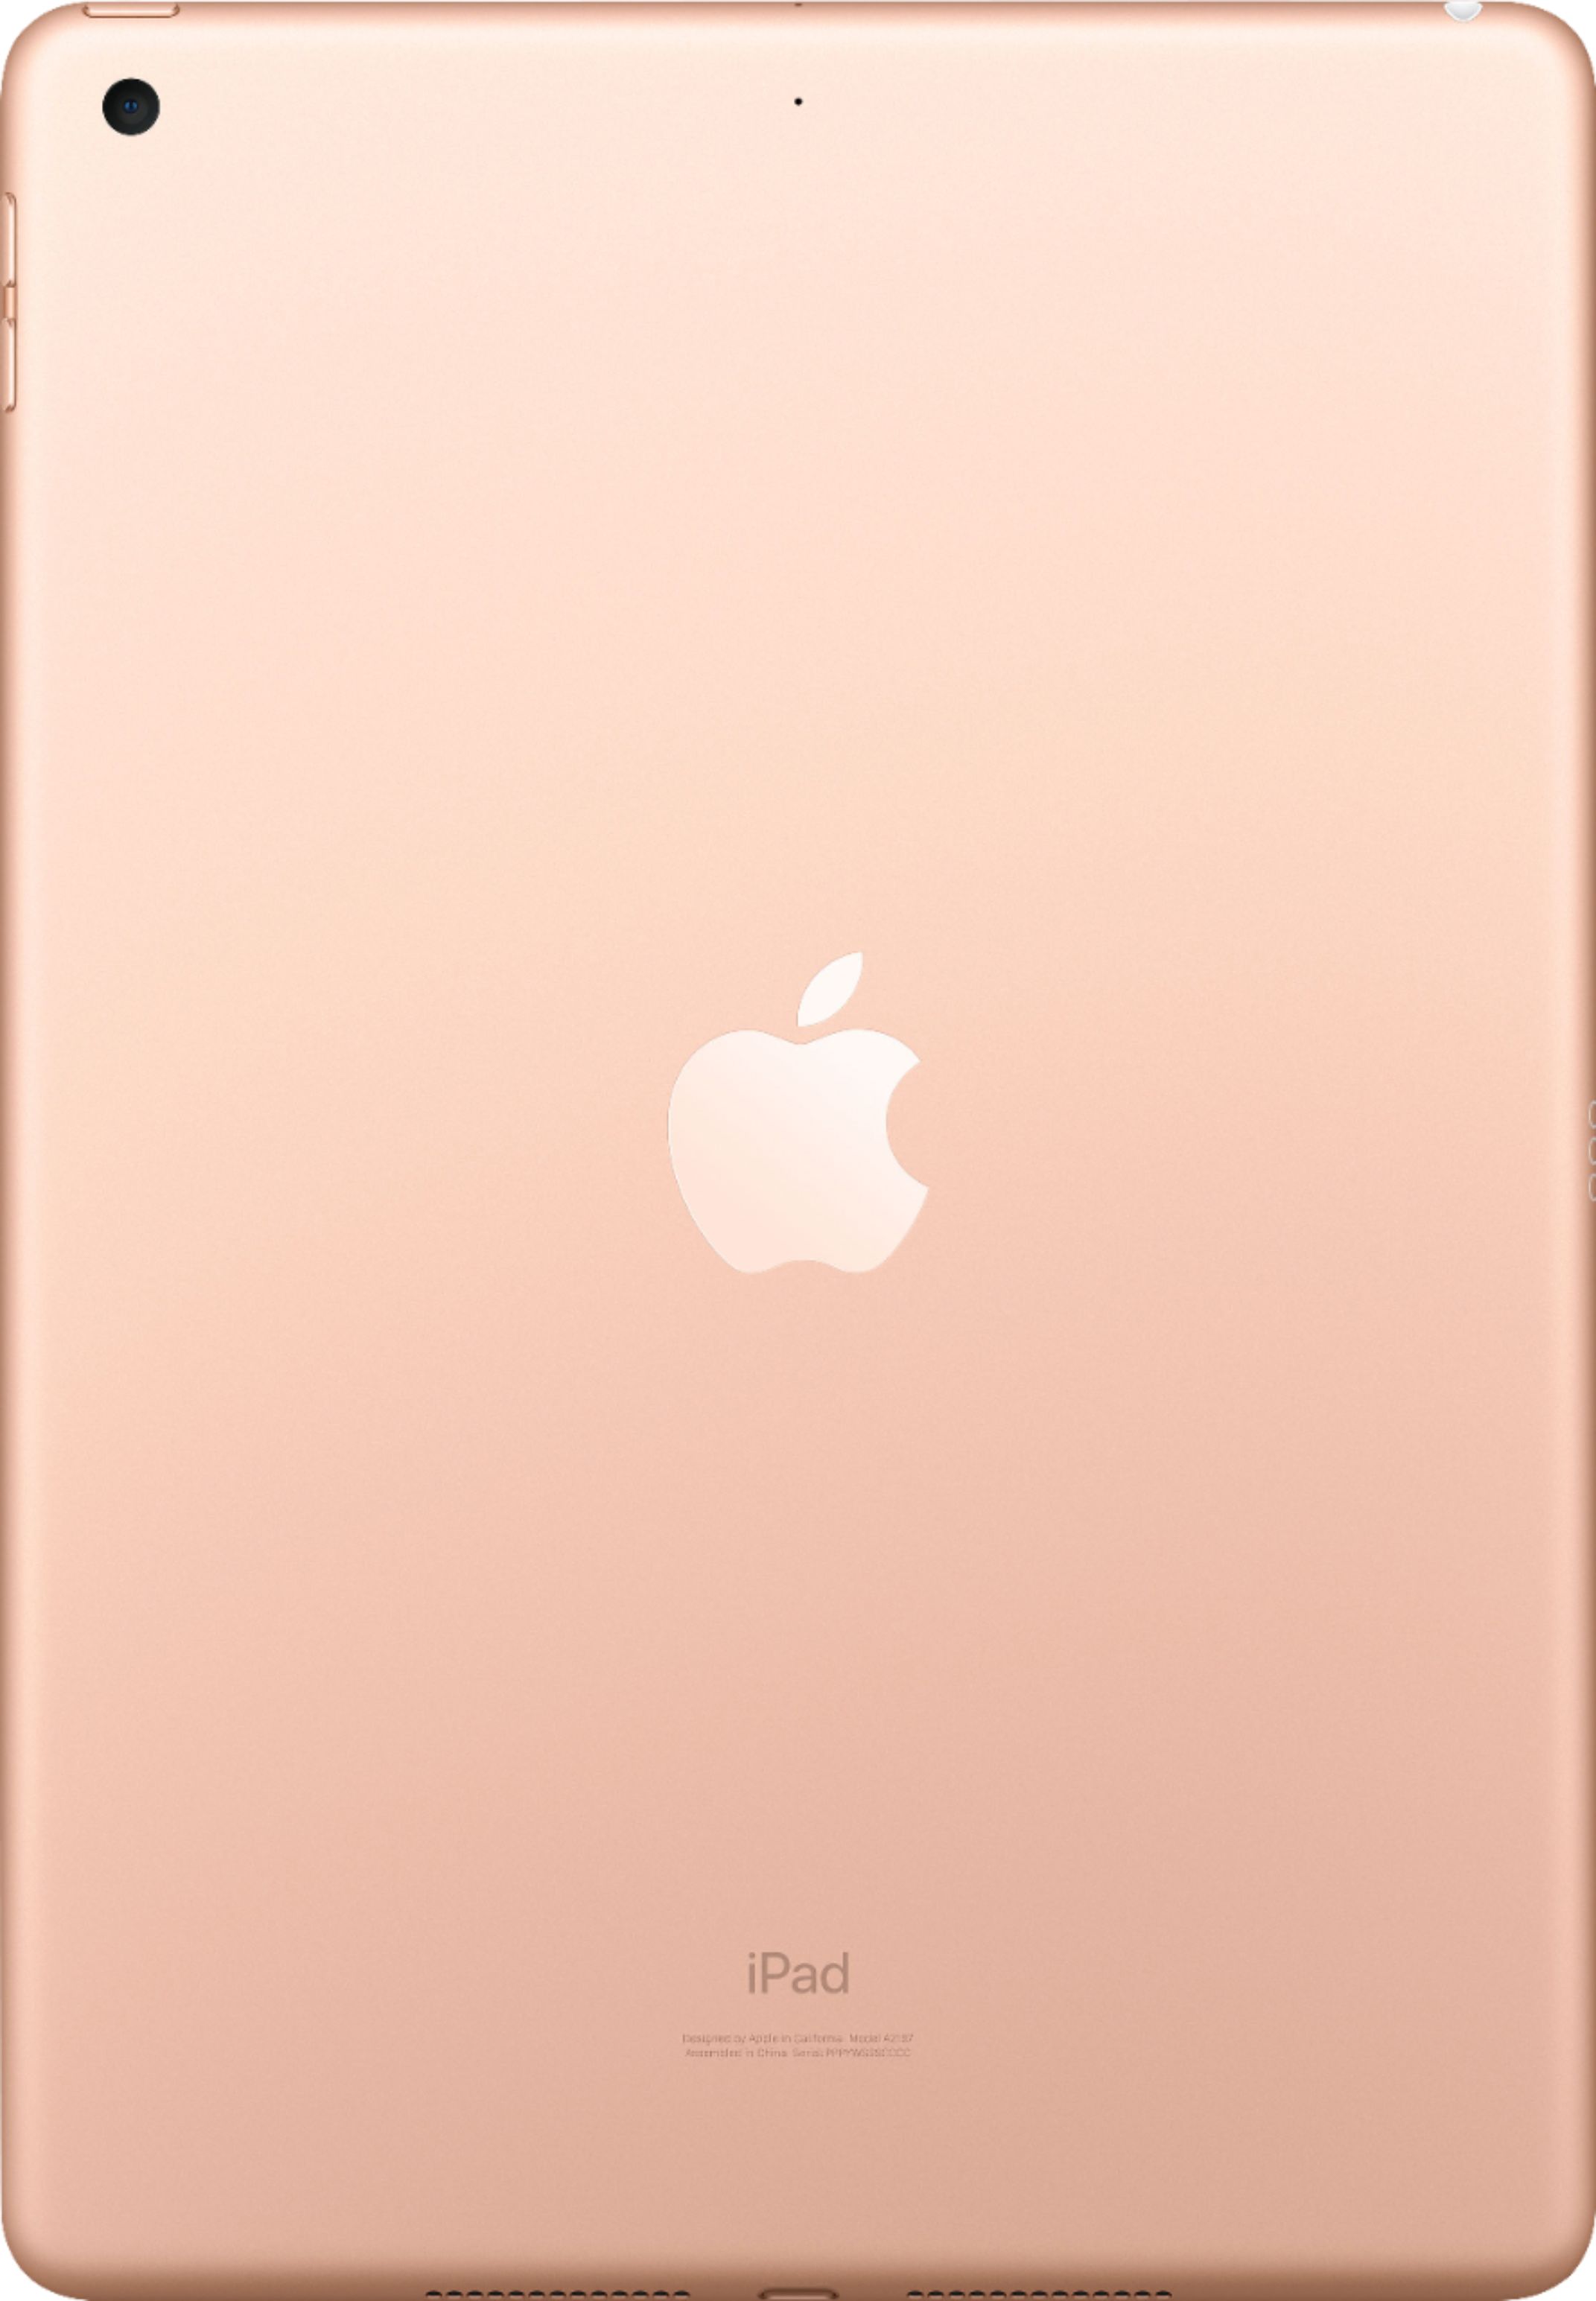 Back View: Apple - 10.2-Inch iPad (Latest Model) with Wi-Fi + Cellular - 256GB - Space Gray (AT&T)